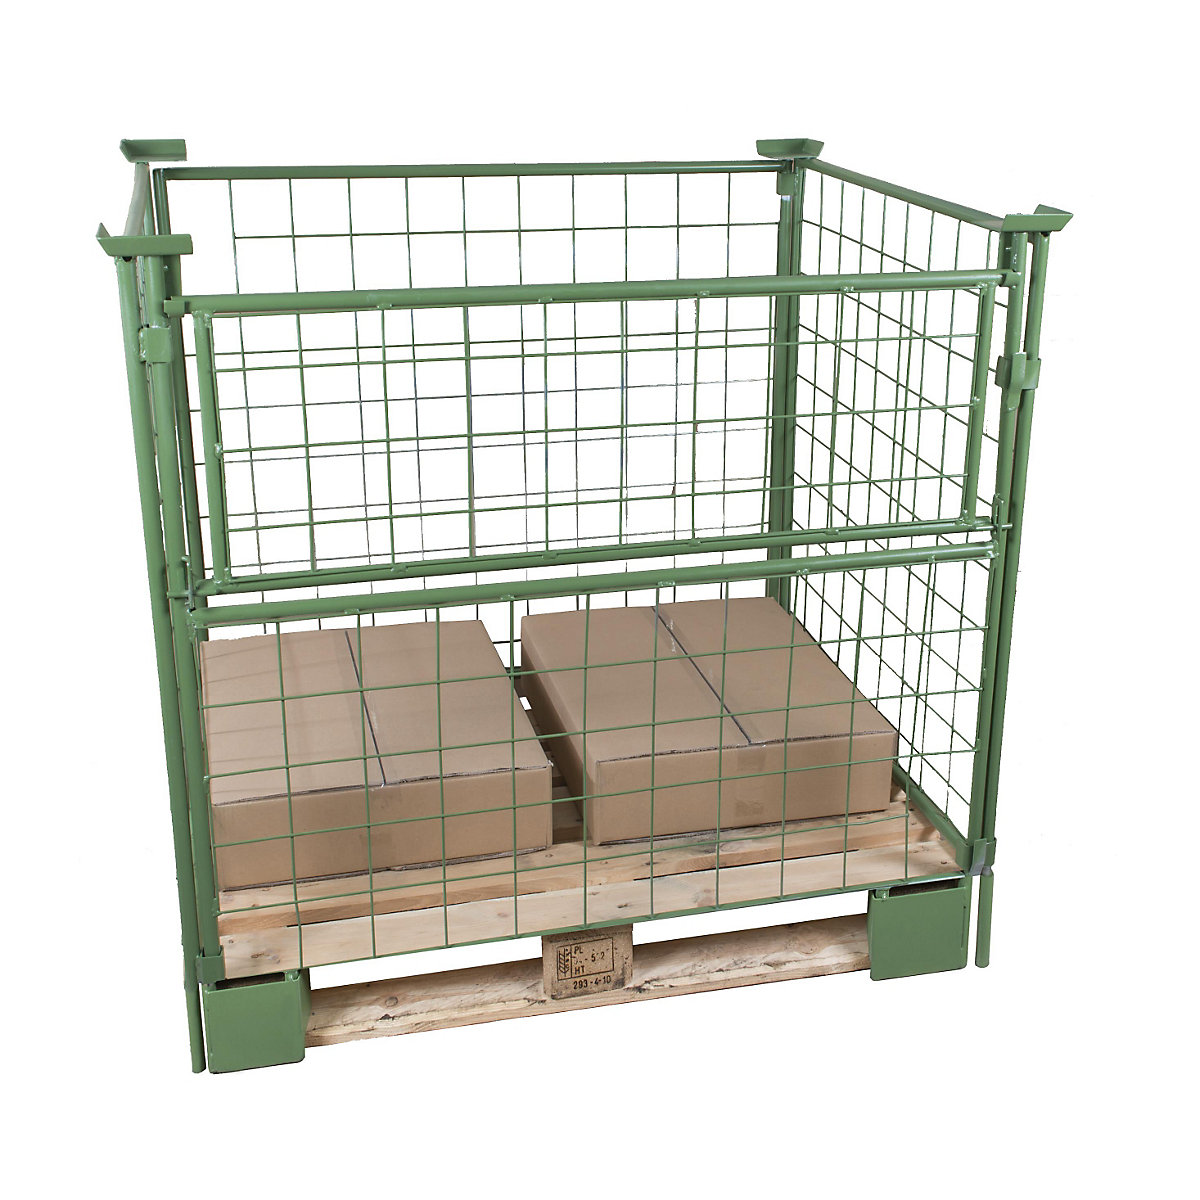 Pallet frame, effective height 1600 mm, for attaching, WxL 800 x 1200 mm, 1 long side can be half folded-2